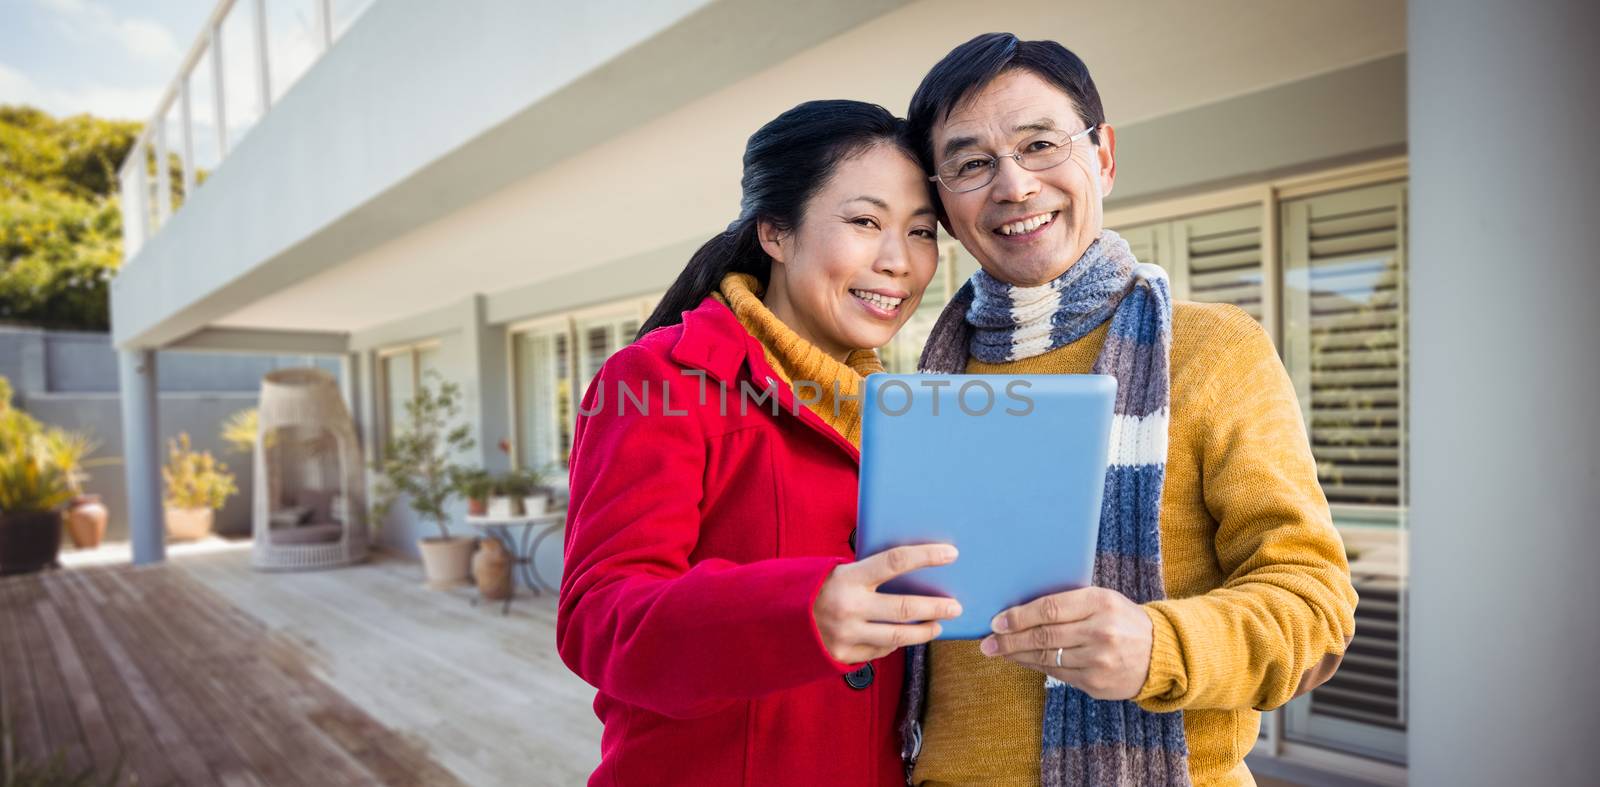 Asian couple on balcony using tablet against stylish outdoor patio area